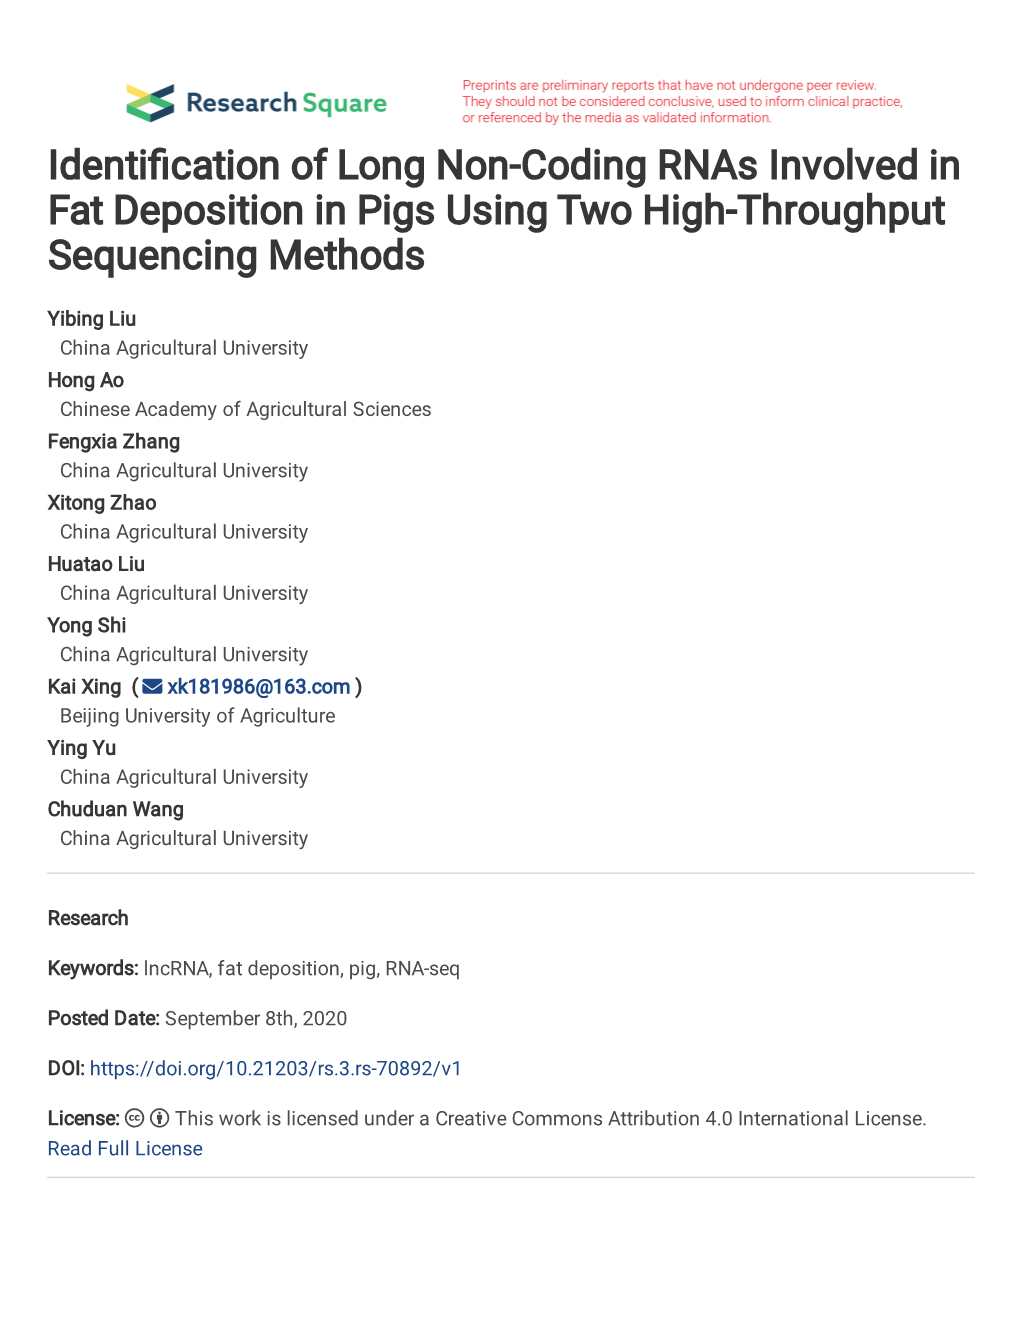 Identification of Long Non-Coding Rnas Involved in Fat Deposition in Pigs